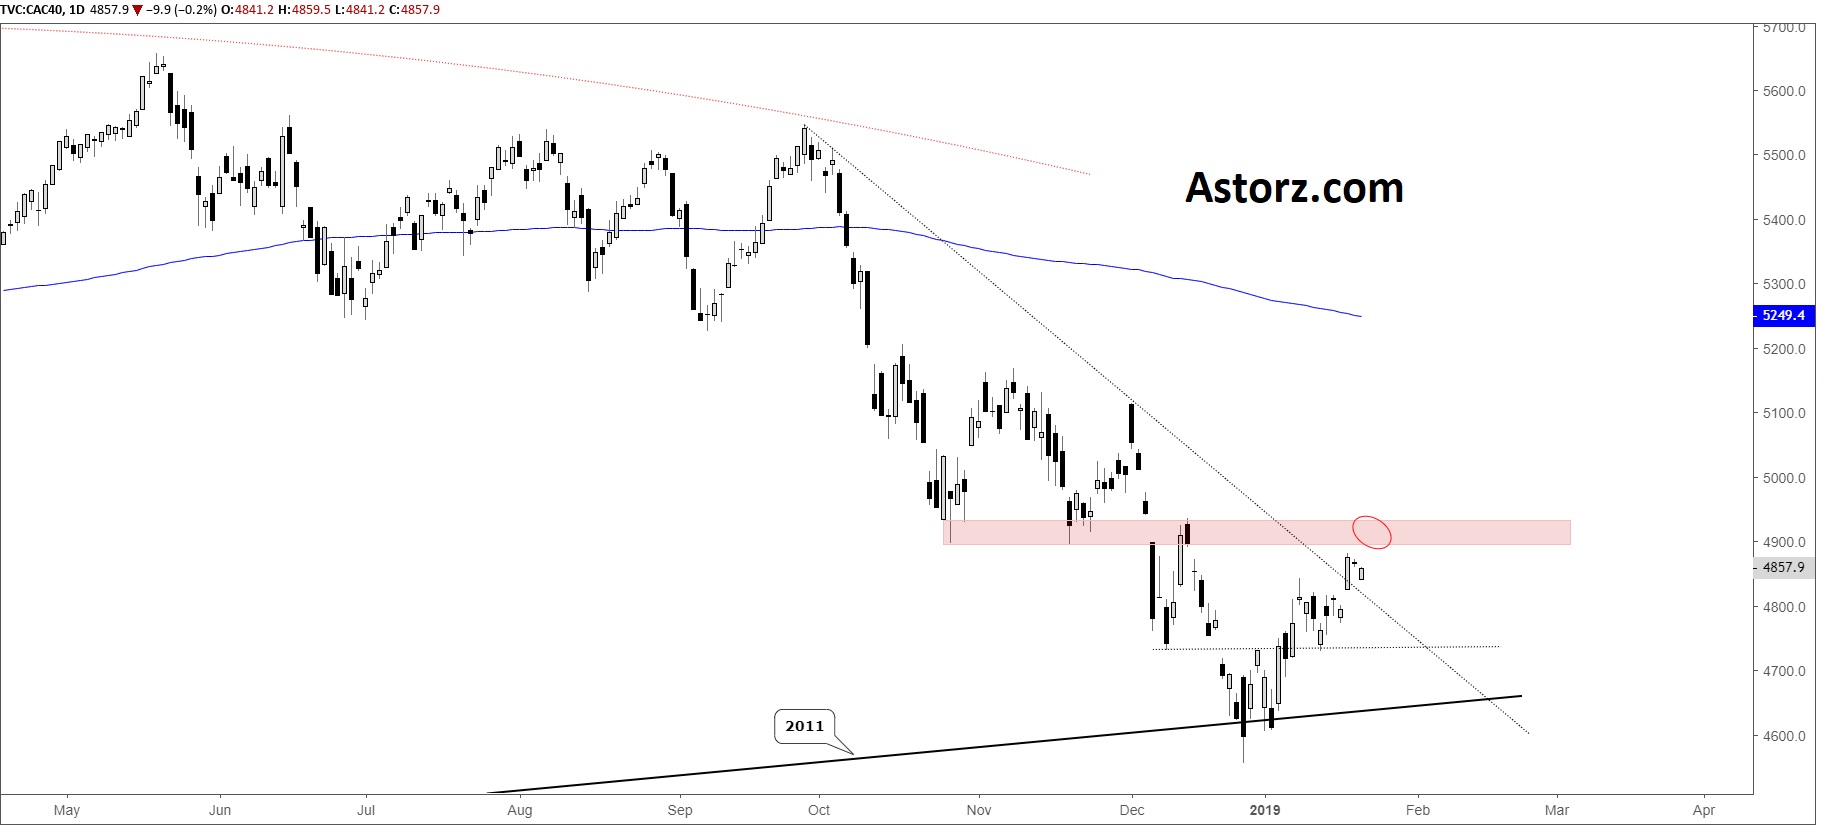 Astorz Trading DAX30 & CAC40 Technical Analysis